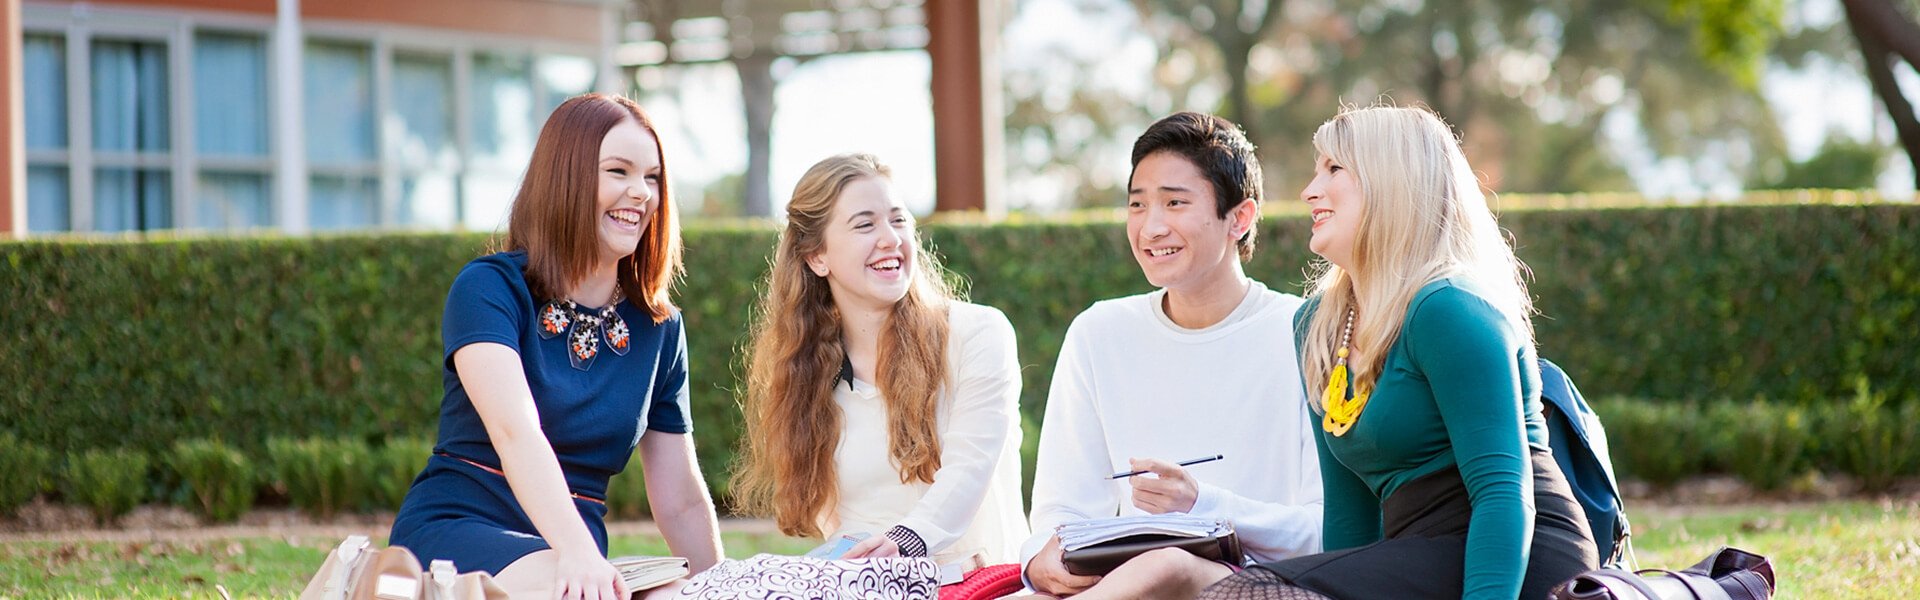 Four students sitting outdoors on the grass, sharing a conversation with textbooks and notebooks.